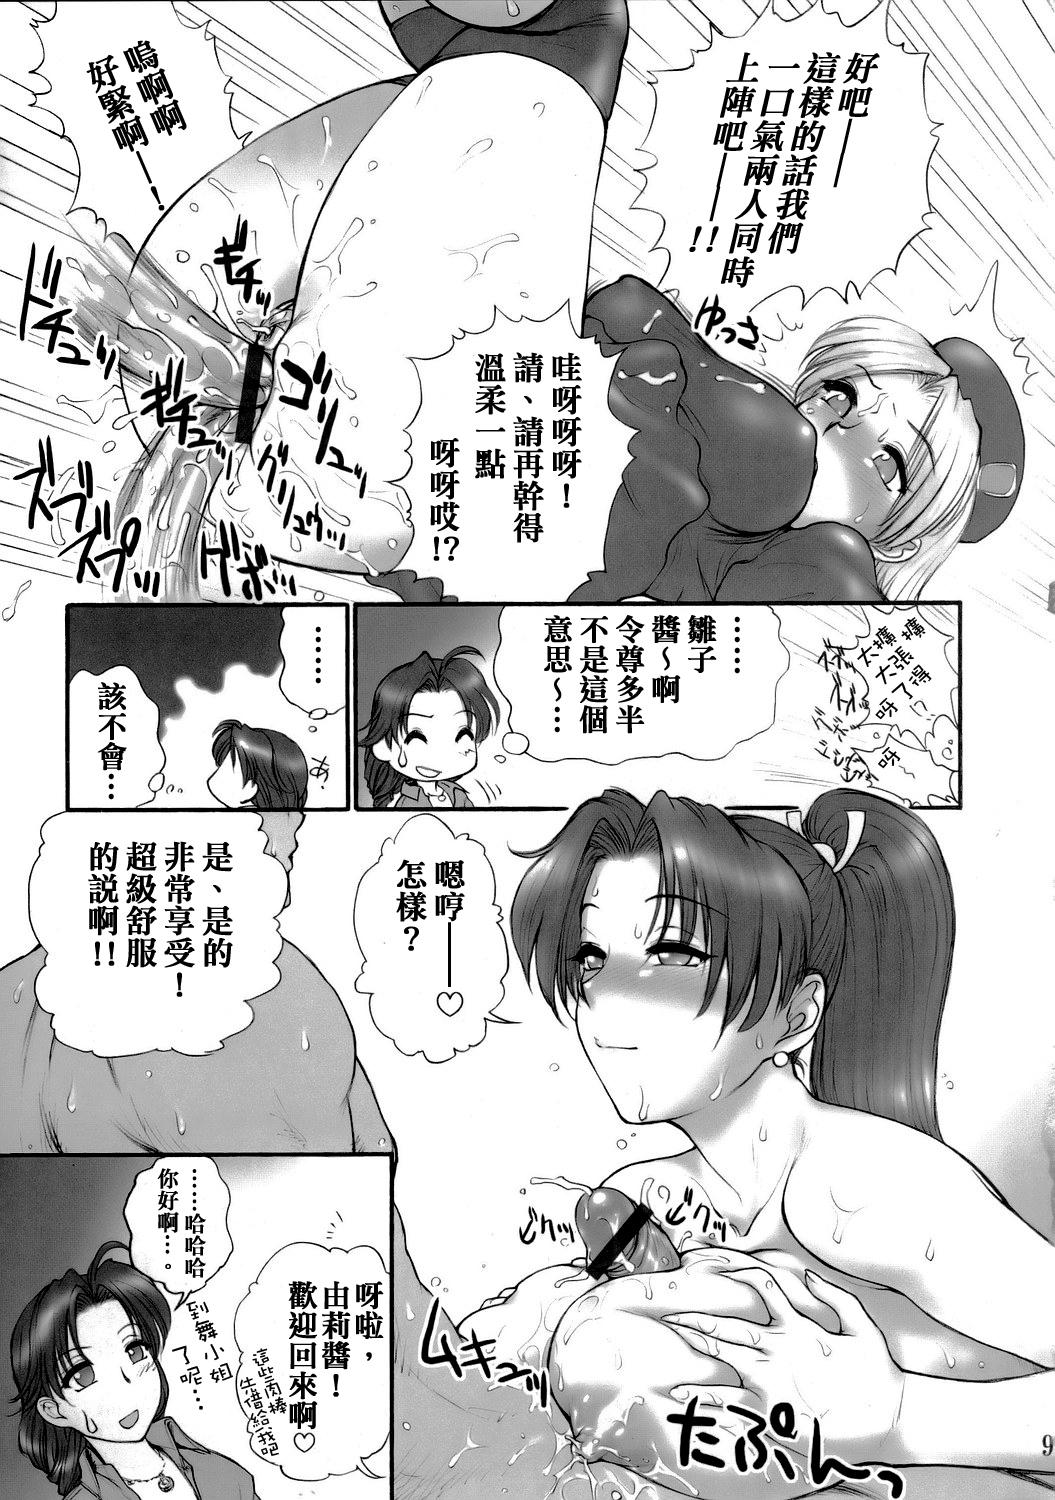 Holes (SC29) [Shinnihon Pepsitou (St. Germain-sal)] Report Concerning Kyoku-gen-ryuu (The King of Fighters) [Chinese] [日祈漢化] - King of fighters Hot Naked Girl - Page 11